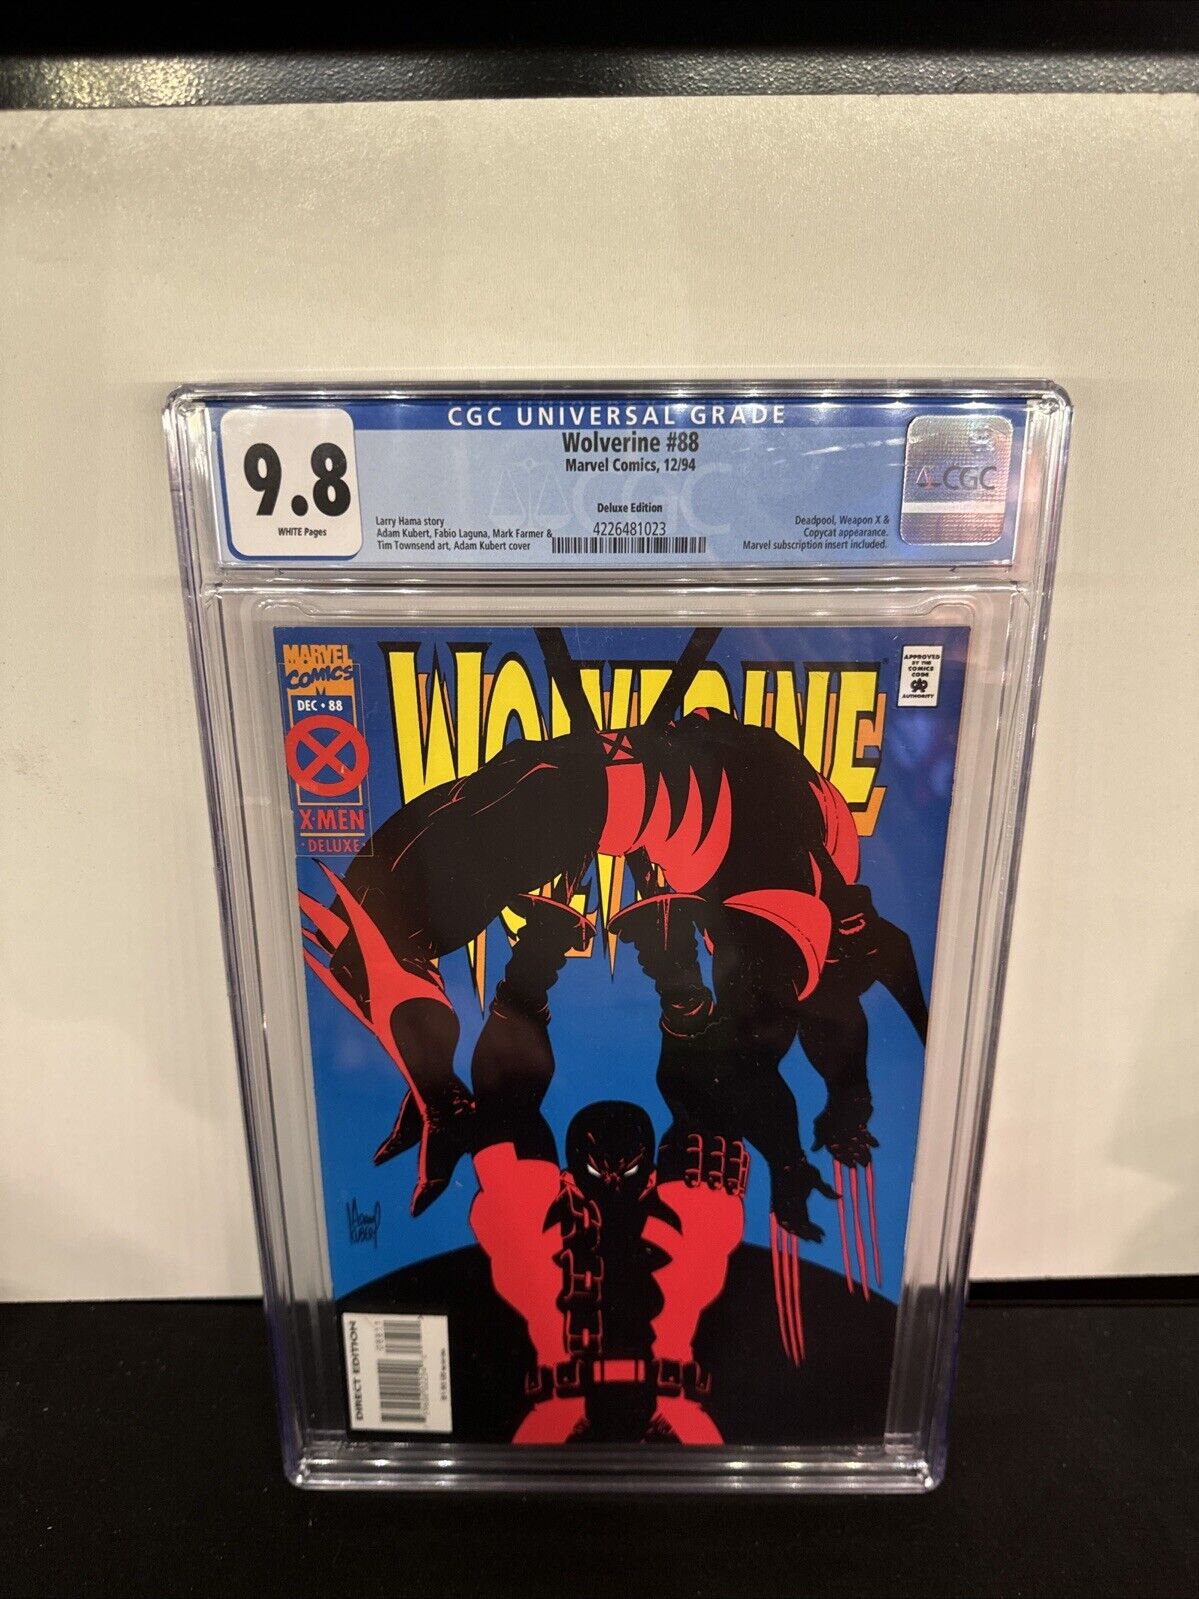 Wolverine #88 Deluxe CGC 9.8 Vol 1 Stunning Book Deadpool & Weapon X Appearance